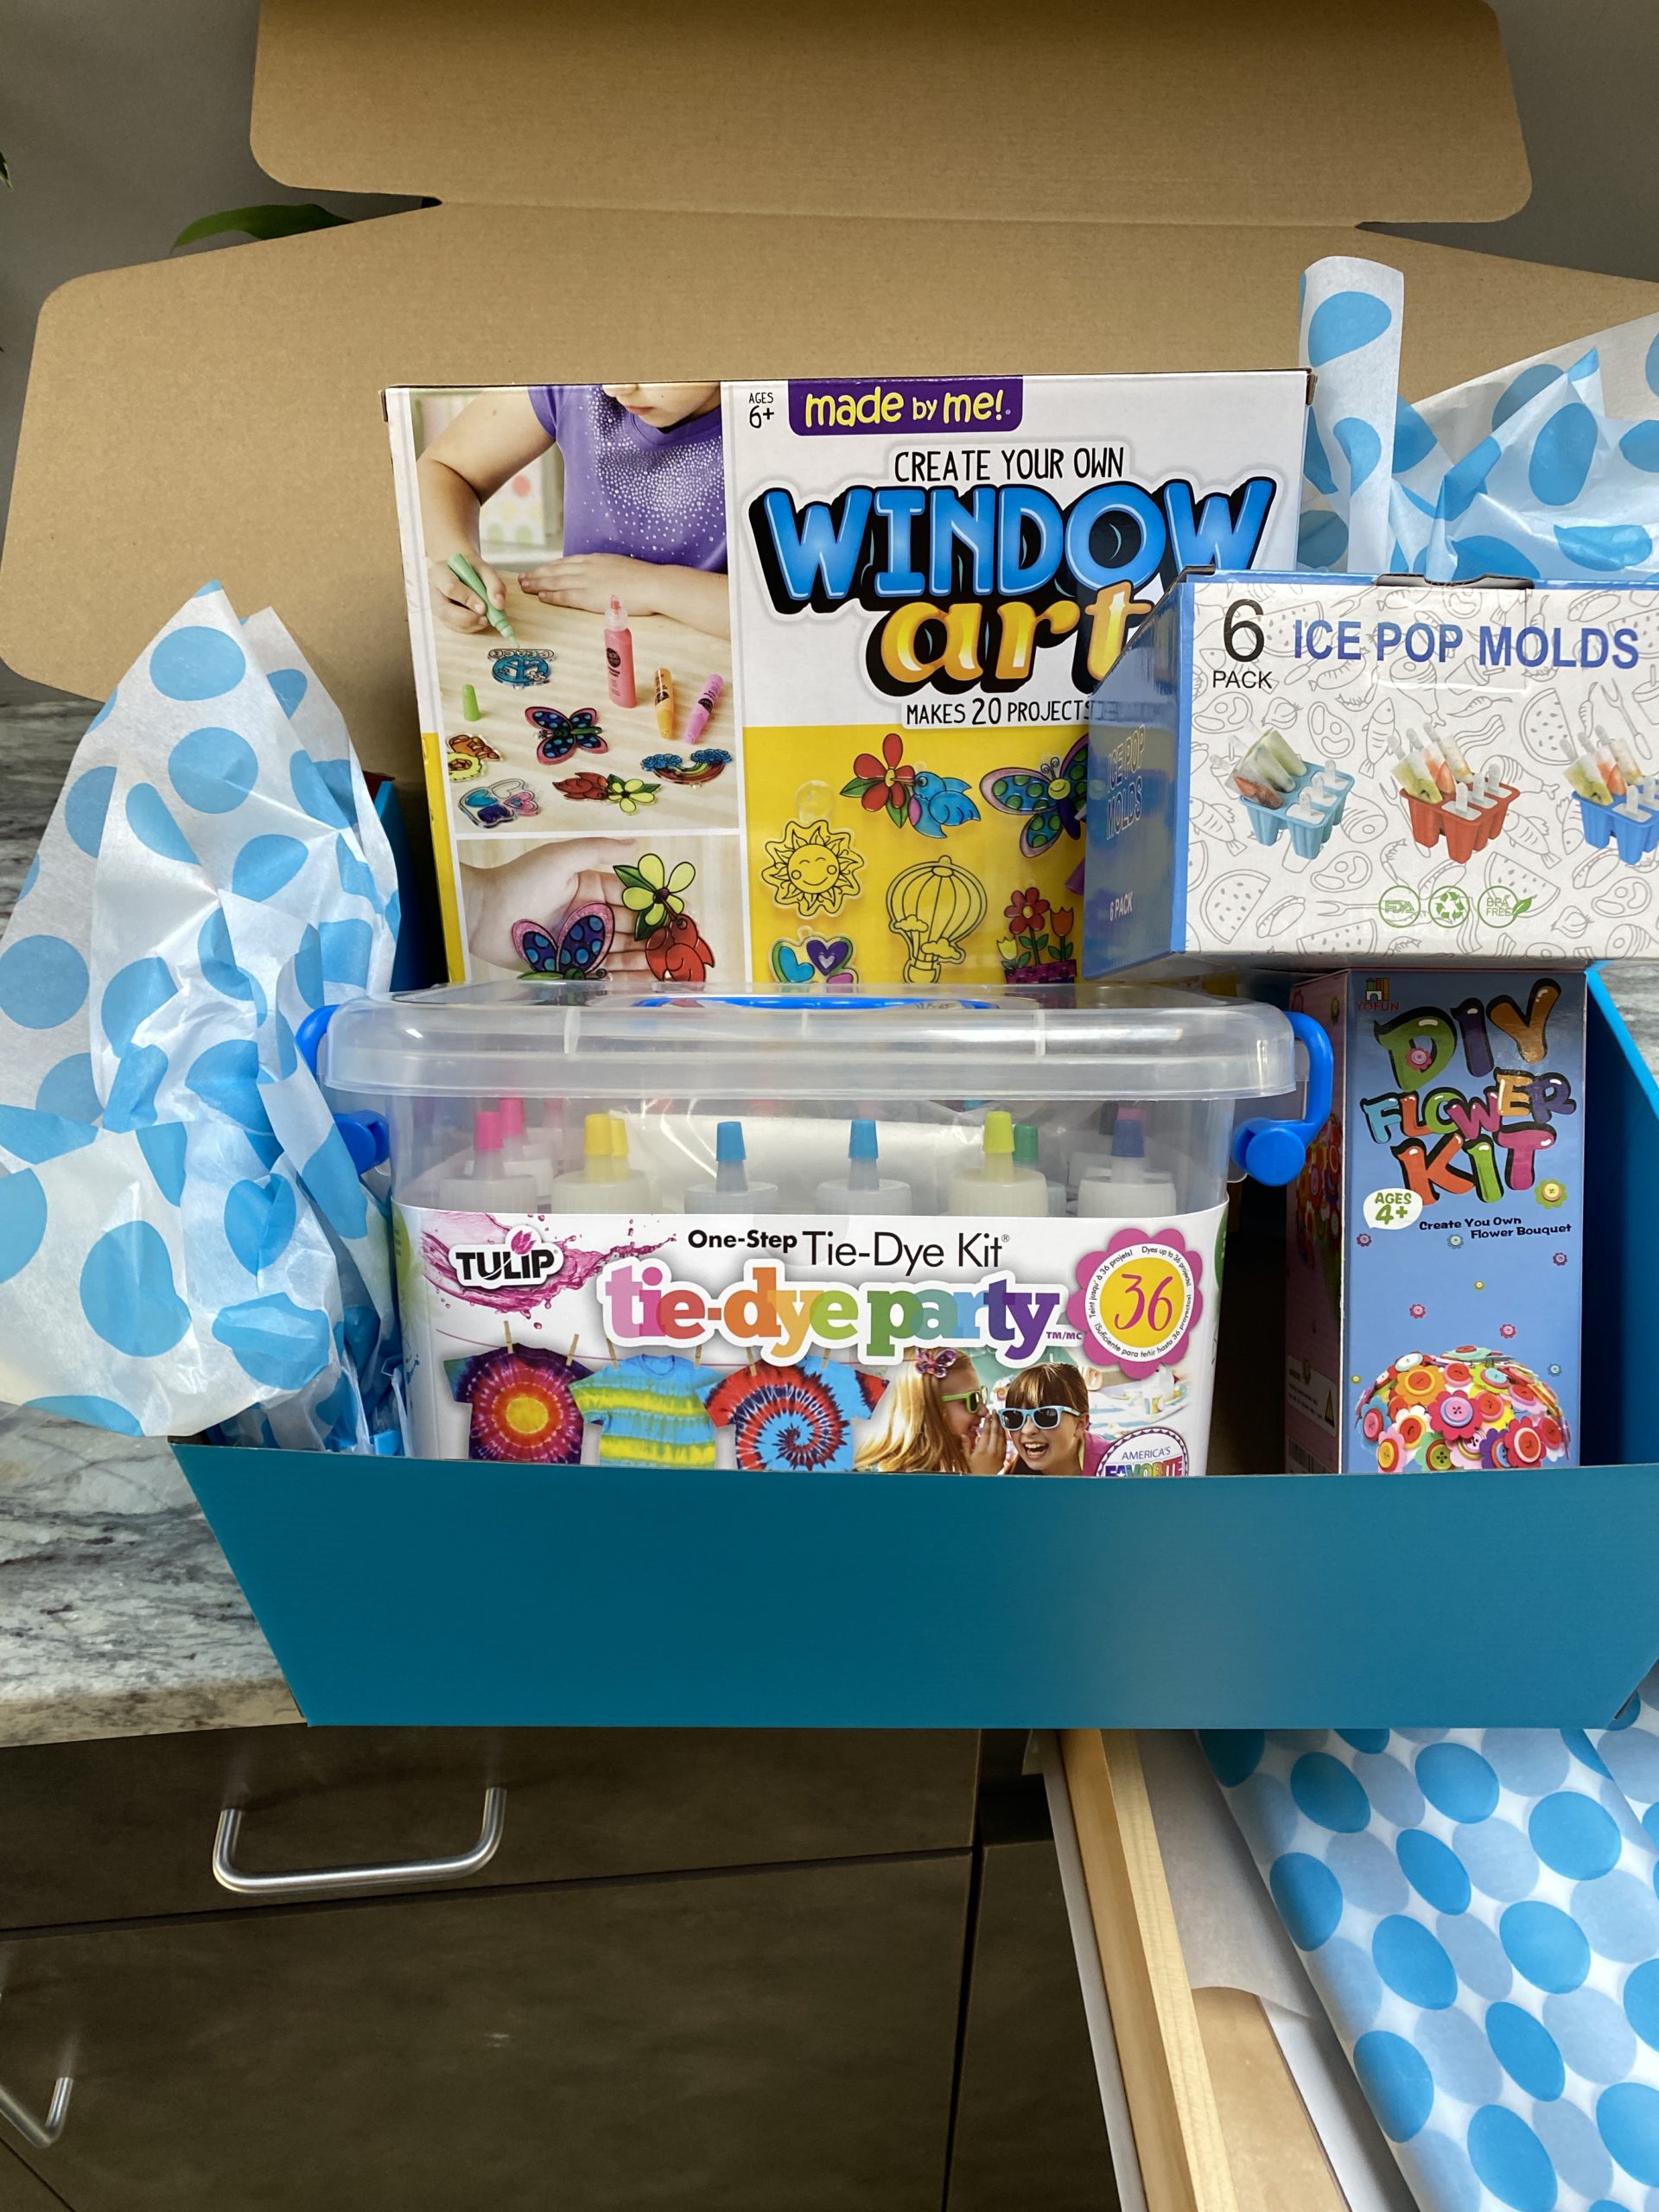 Blue box filled with ice pop molds, DIY flower kit, tie-dye party kit